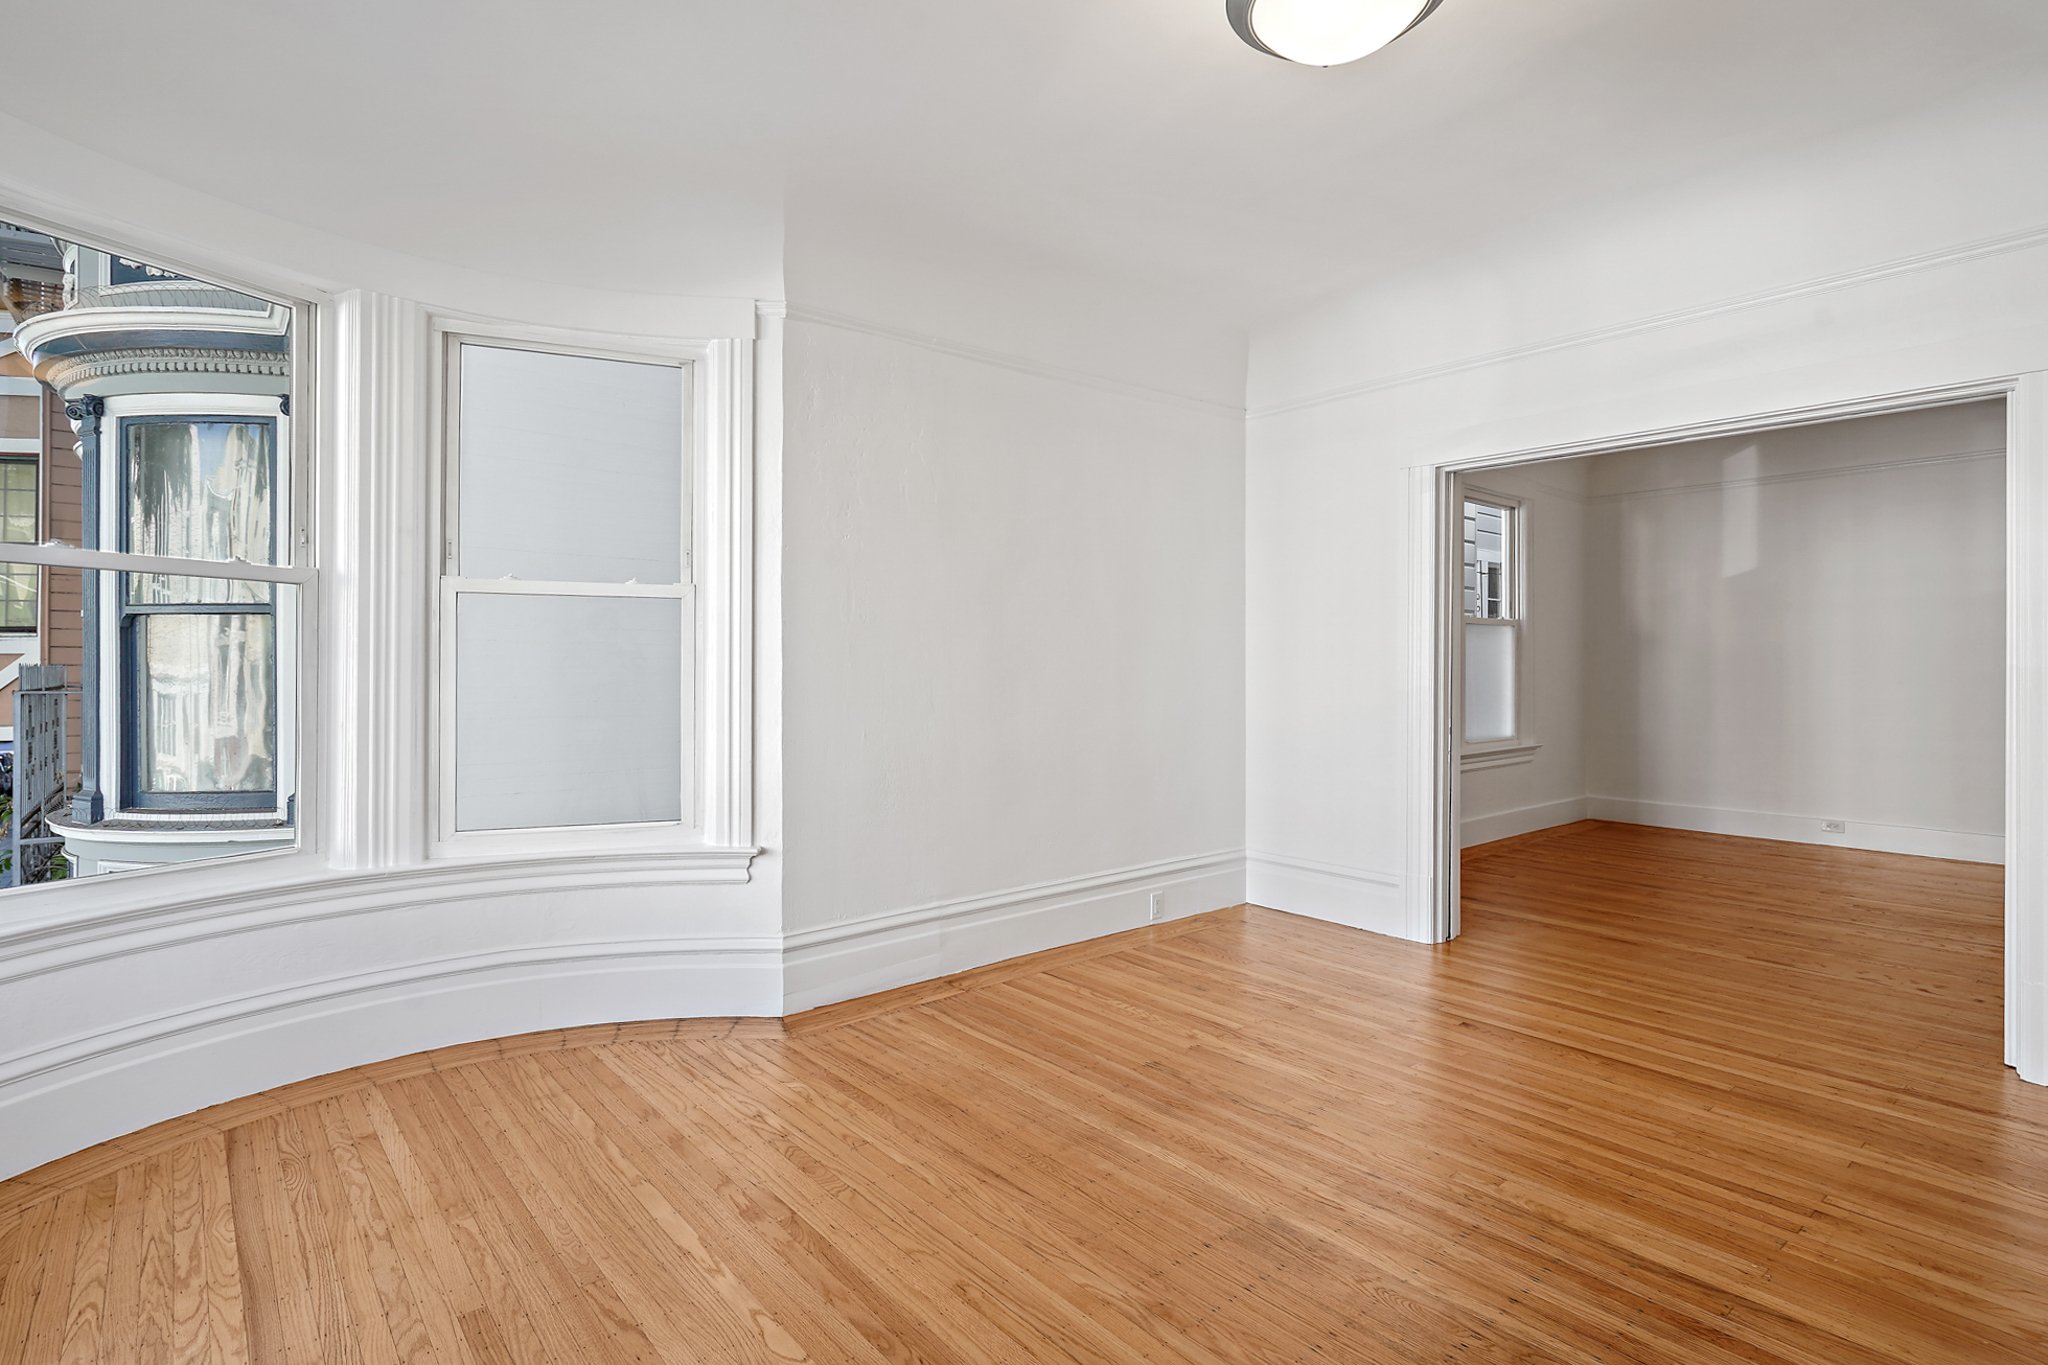 426-428 Guerrero St, SF | Offered in its entirety or available as TWO ...